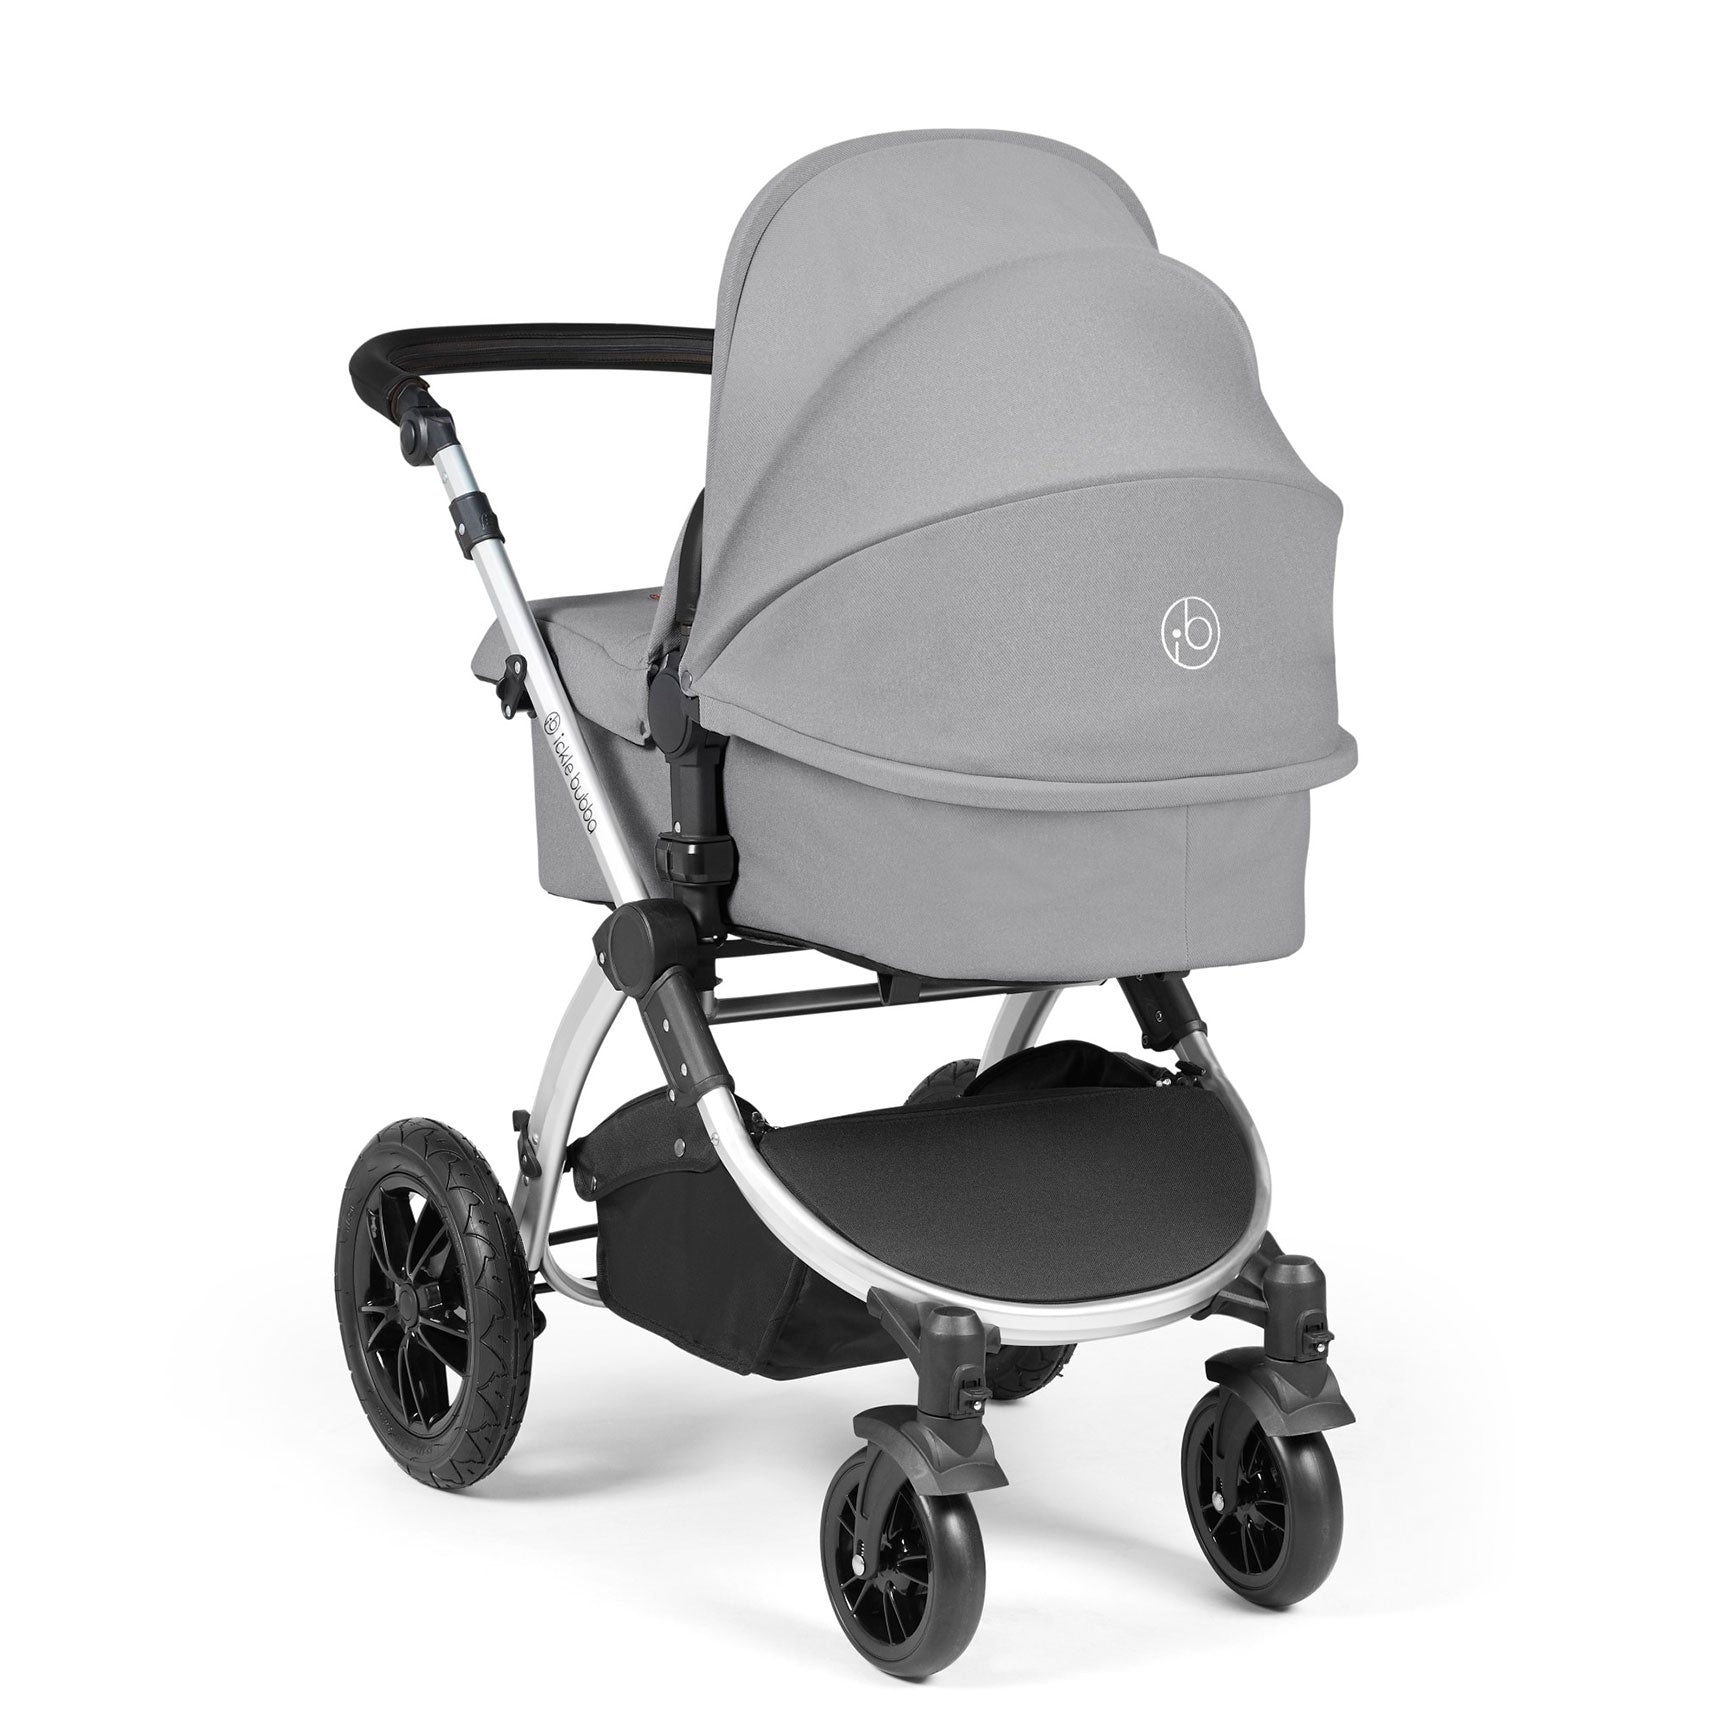 Ickle Bubba travel systems Ickle Bubba Stomp Luxe 2 in 1 Plus Pushchair & Carrycot - Silver/Pearl Grey/Black 10-003-001-259